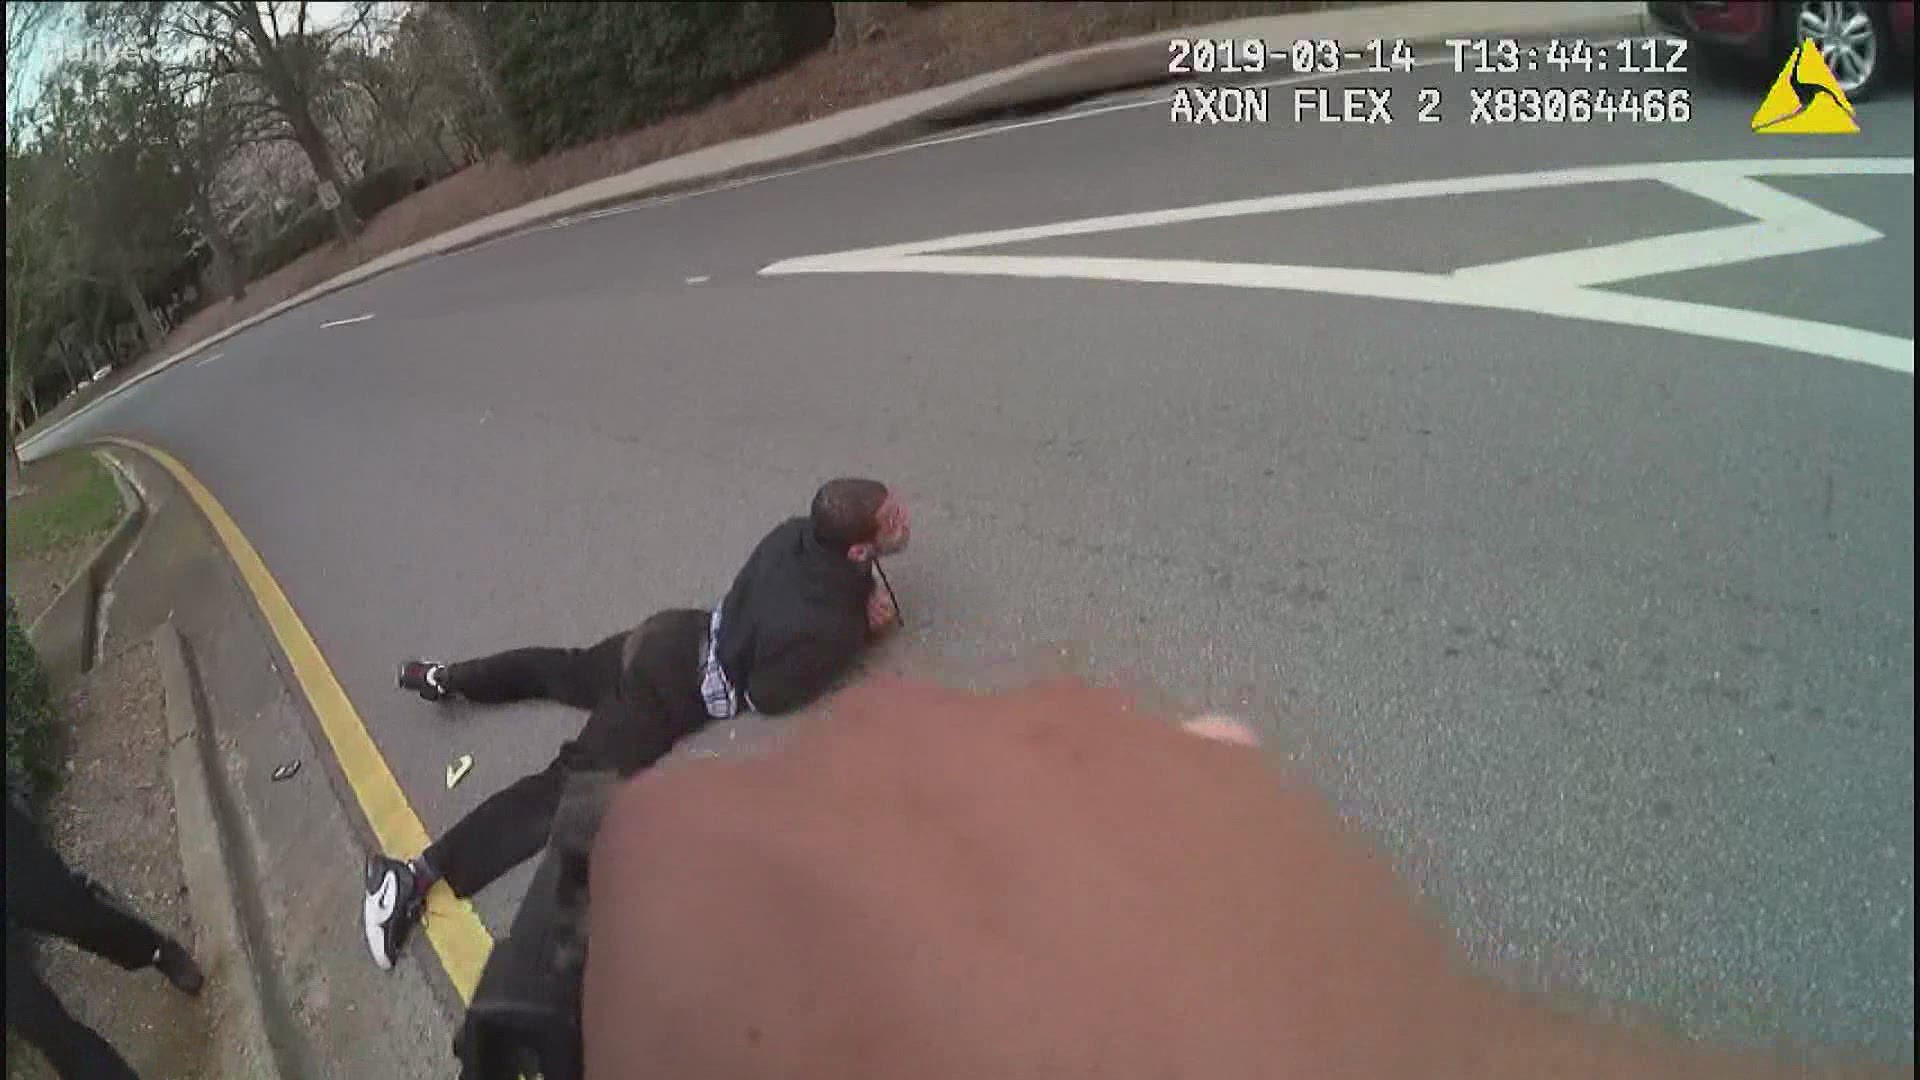 A Stone Mountain man tased last year by a Gwinnett County Police officer is suing the department, the county, and two officers for $10 million.